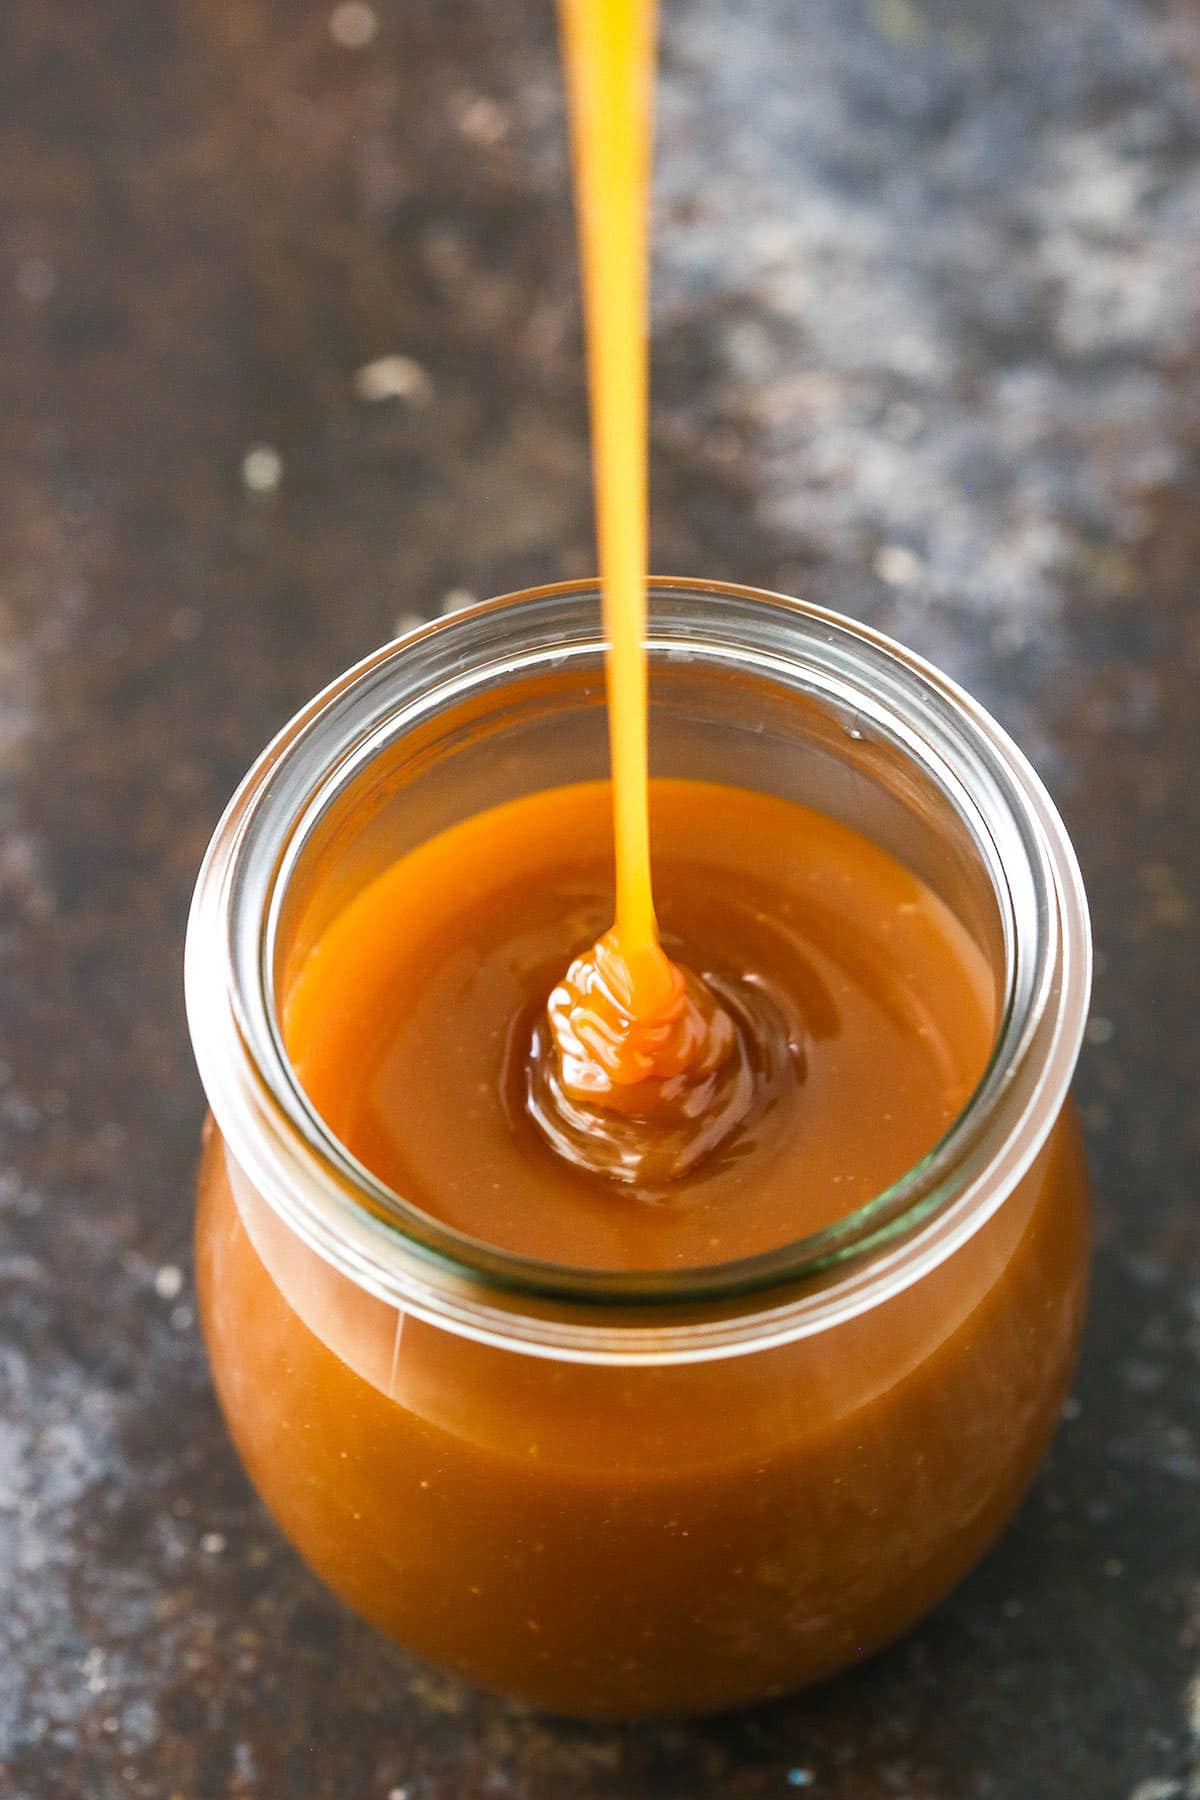 How To Make Homemade Caramel Sauce (+ Tips and Flavor Options)